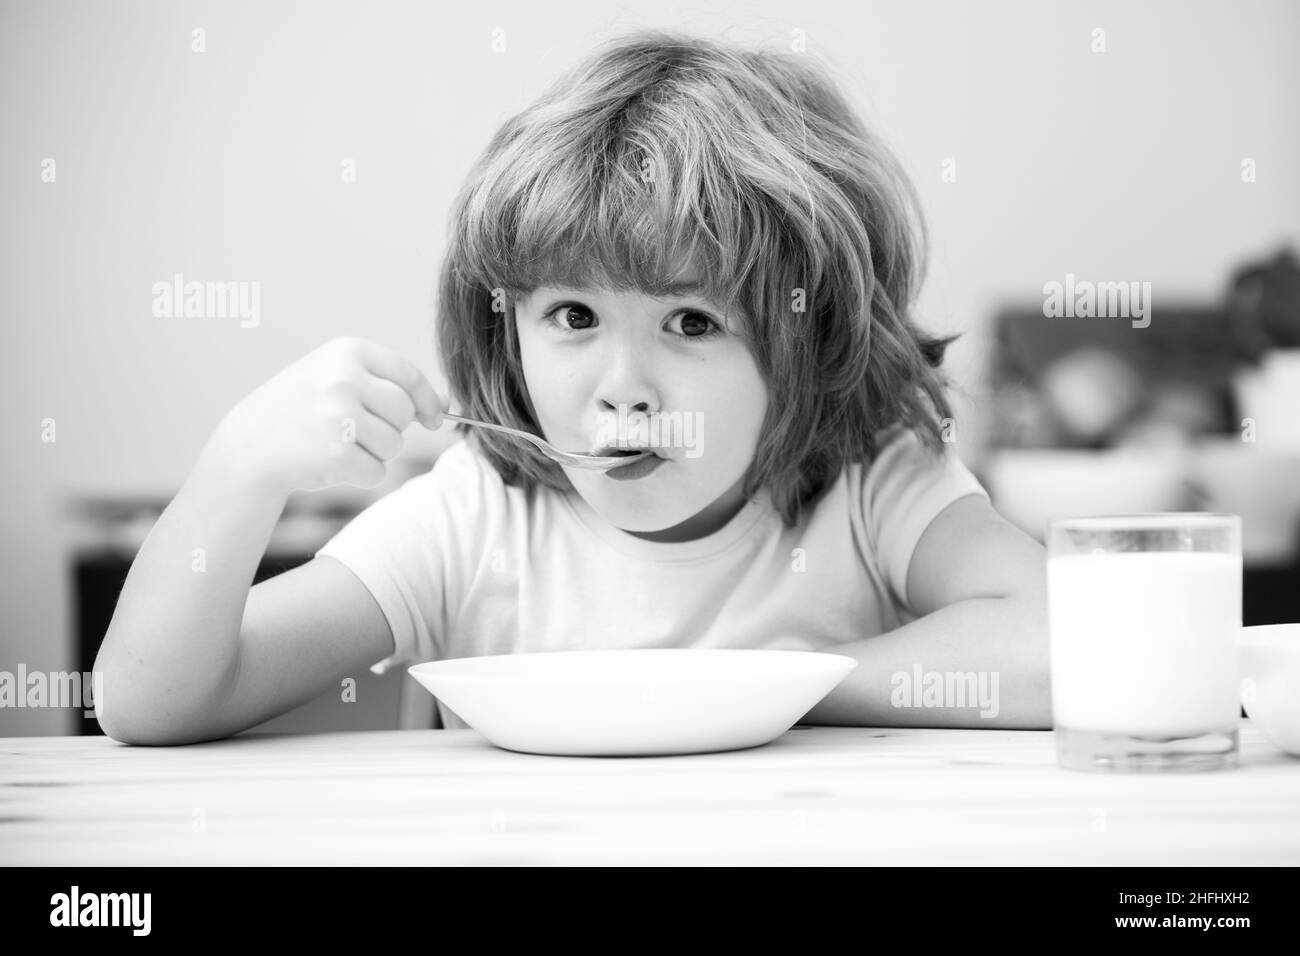 Food and drink for kids. Child eating healthy food. Cute little boy having soup for lunch. Stock Photo